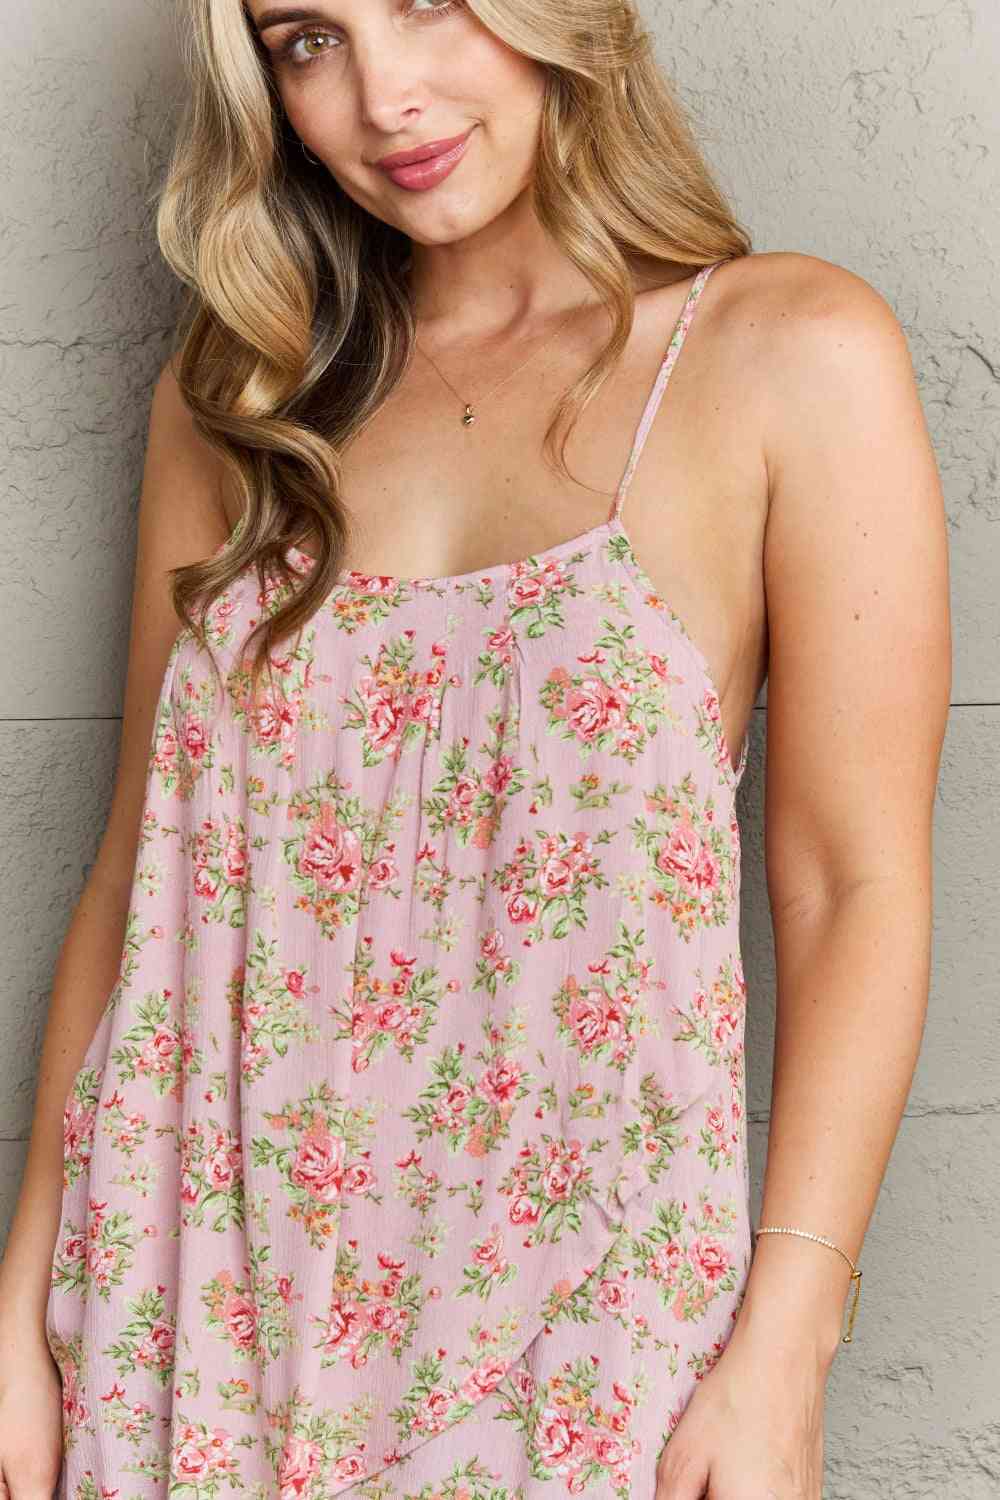 Ninexis Hang Loose Tulip Hem Cami Top in Mauve Floral Print on any thing USA/STOD clothes